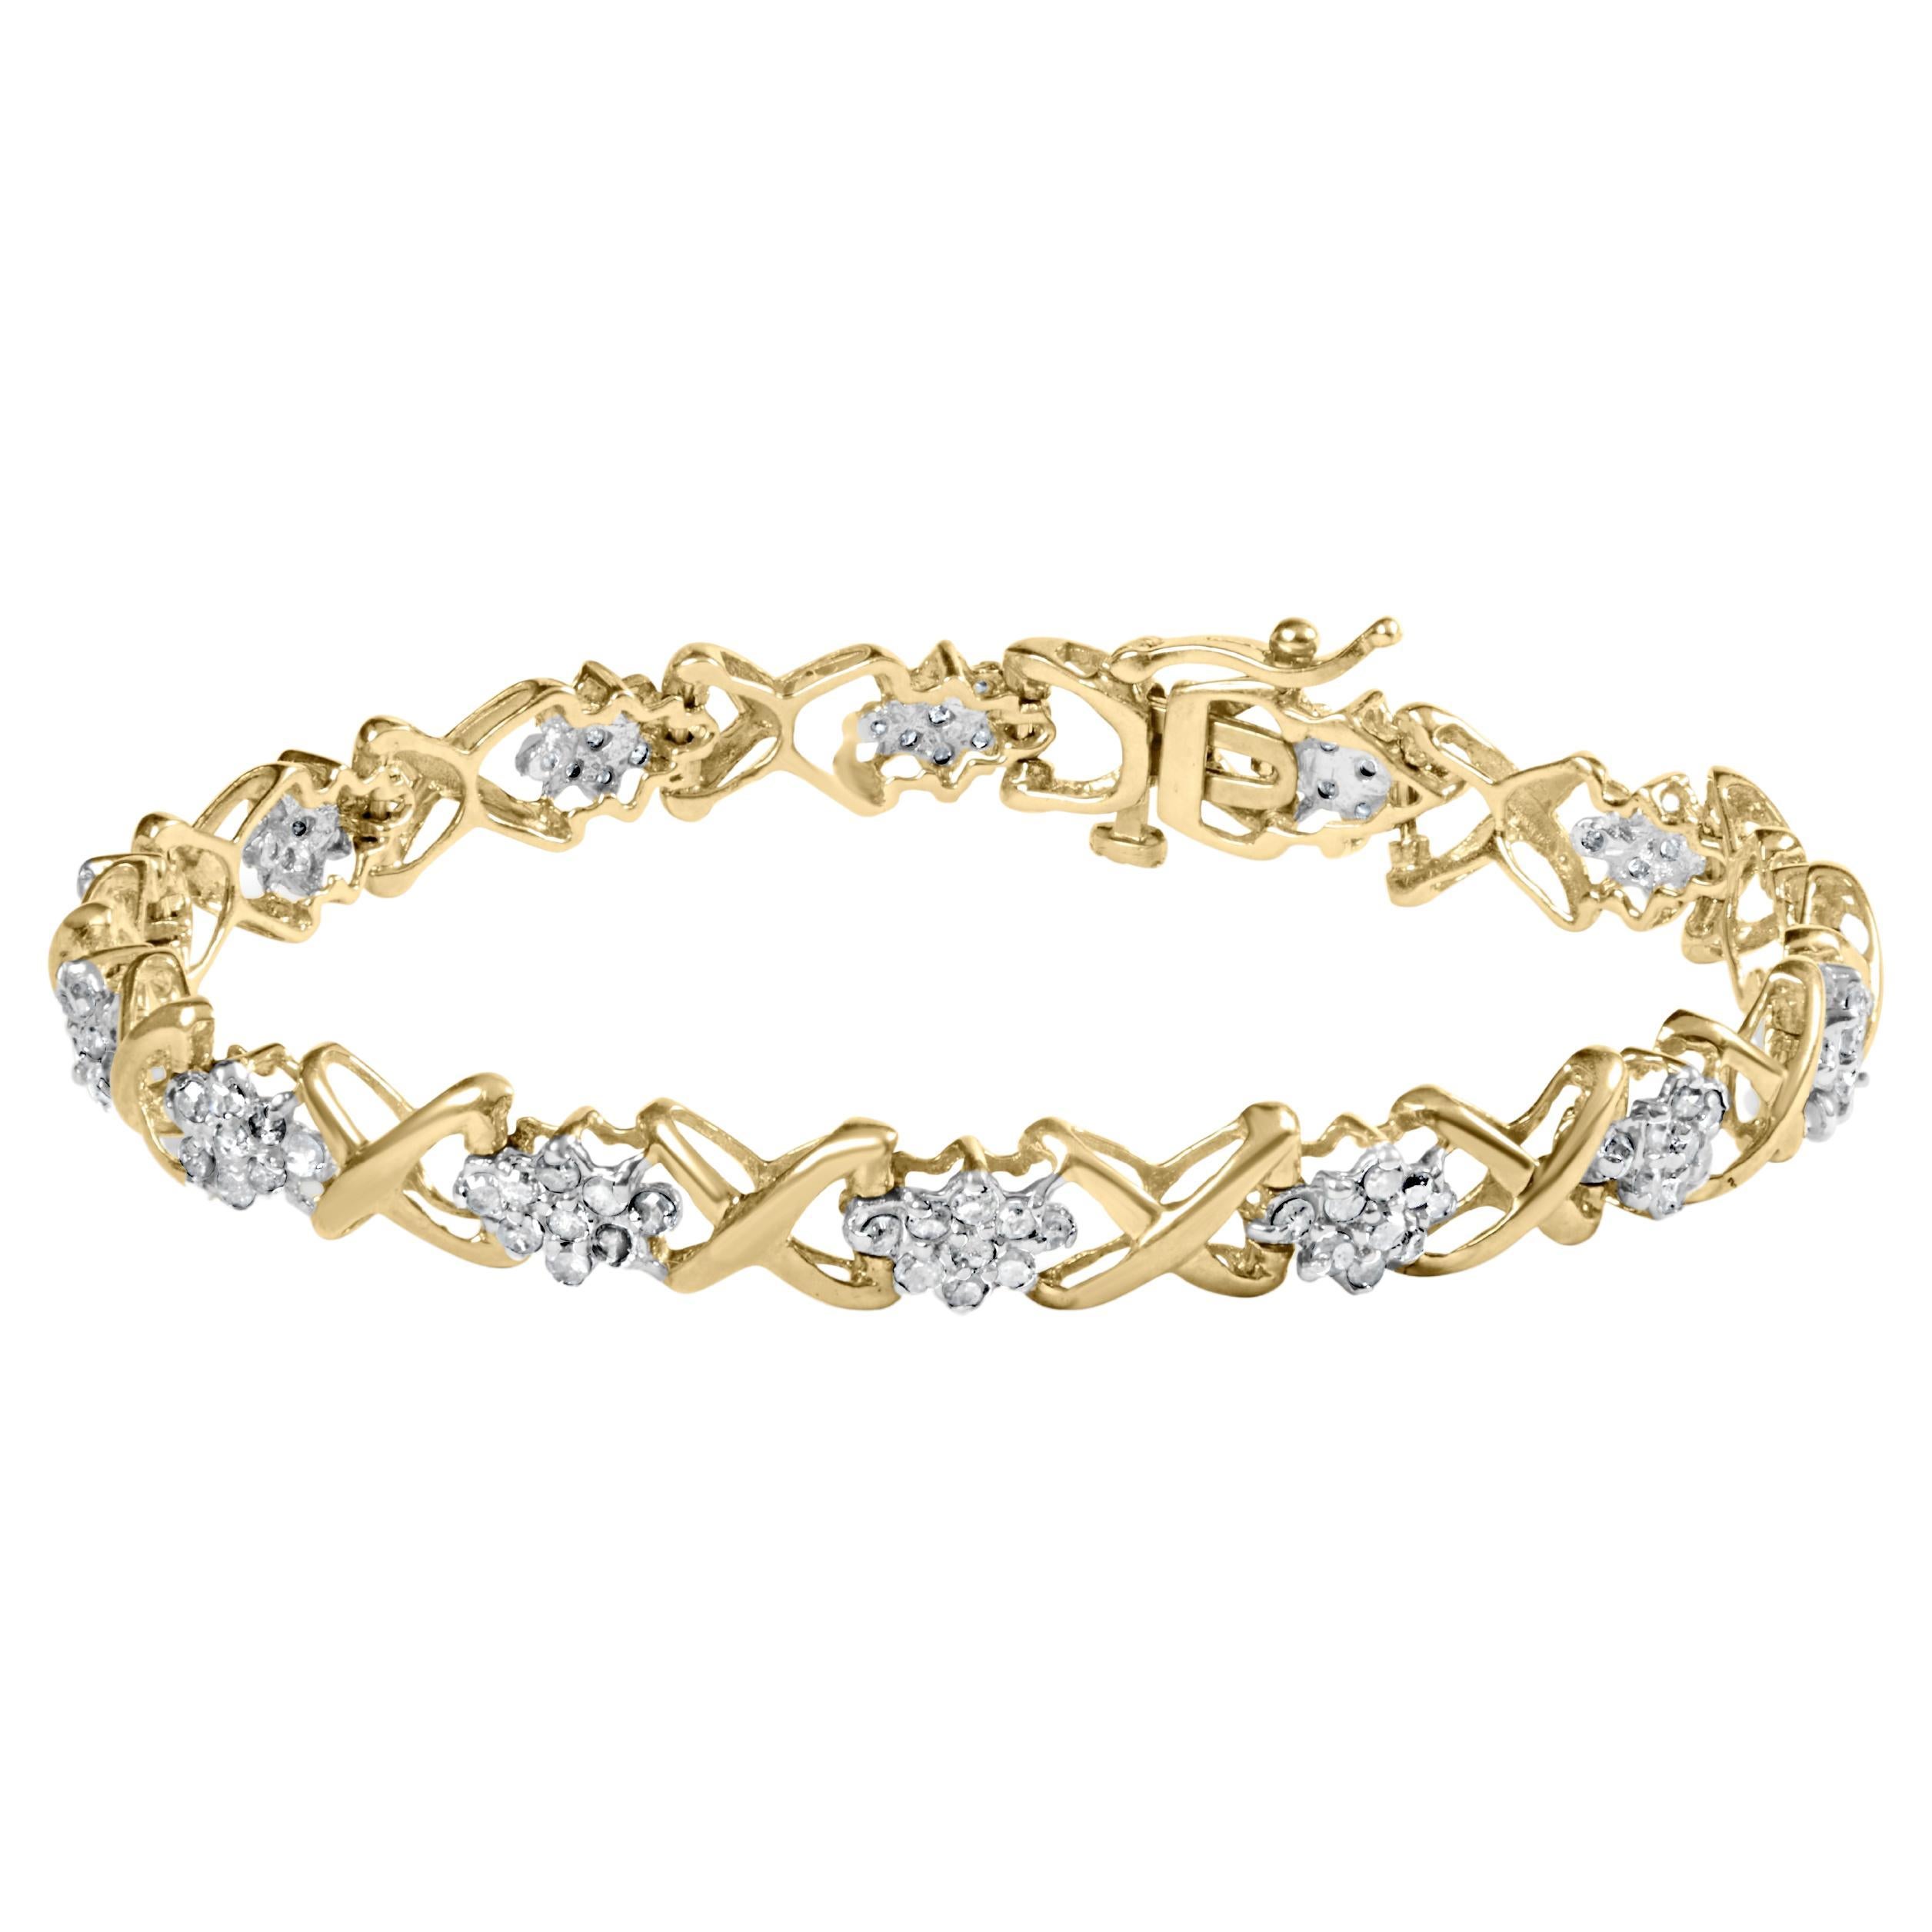 10K Yellow Gold 2.0 Carat Diamond Cluster and Alternating "X" Link Bracelet For Sale